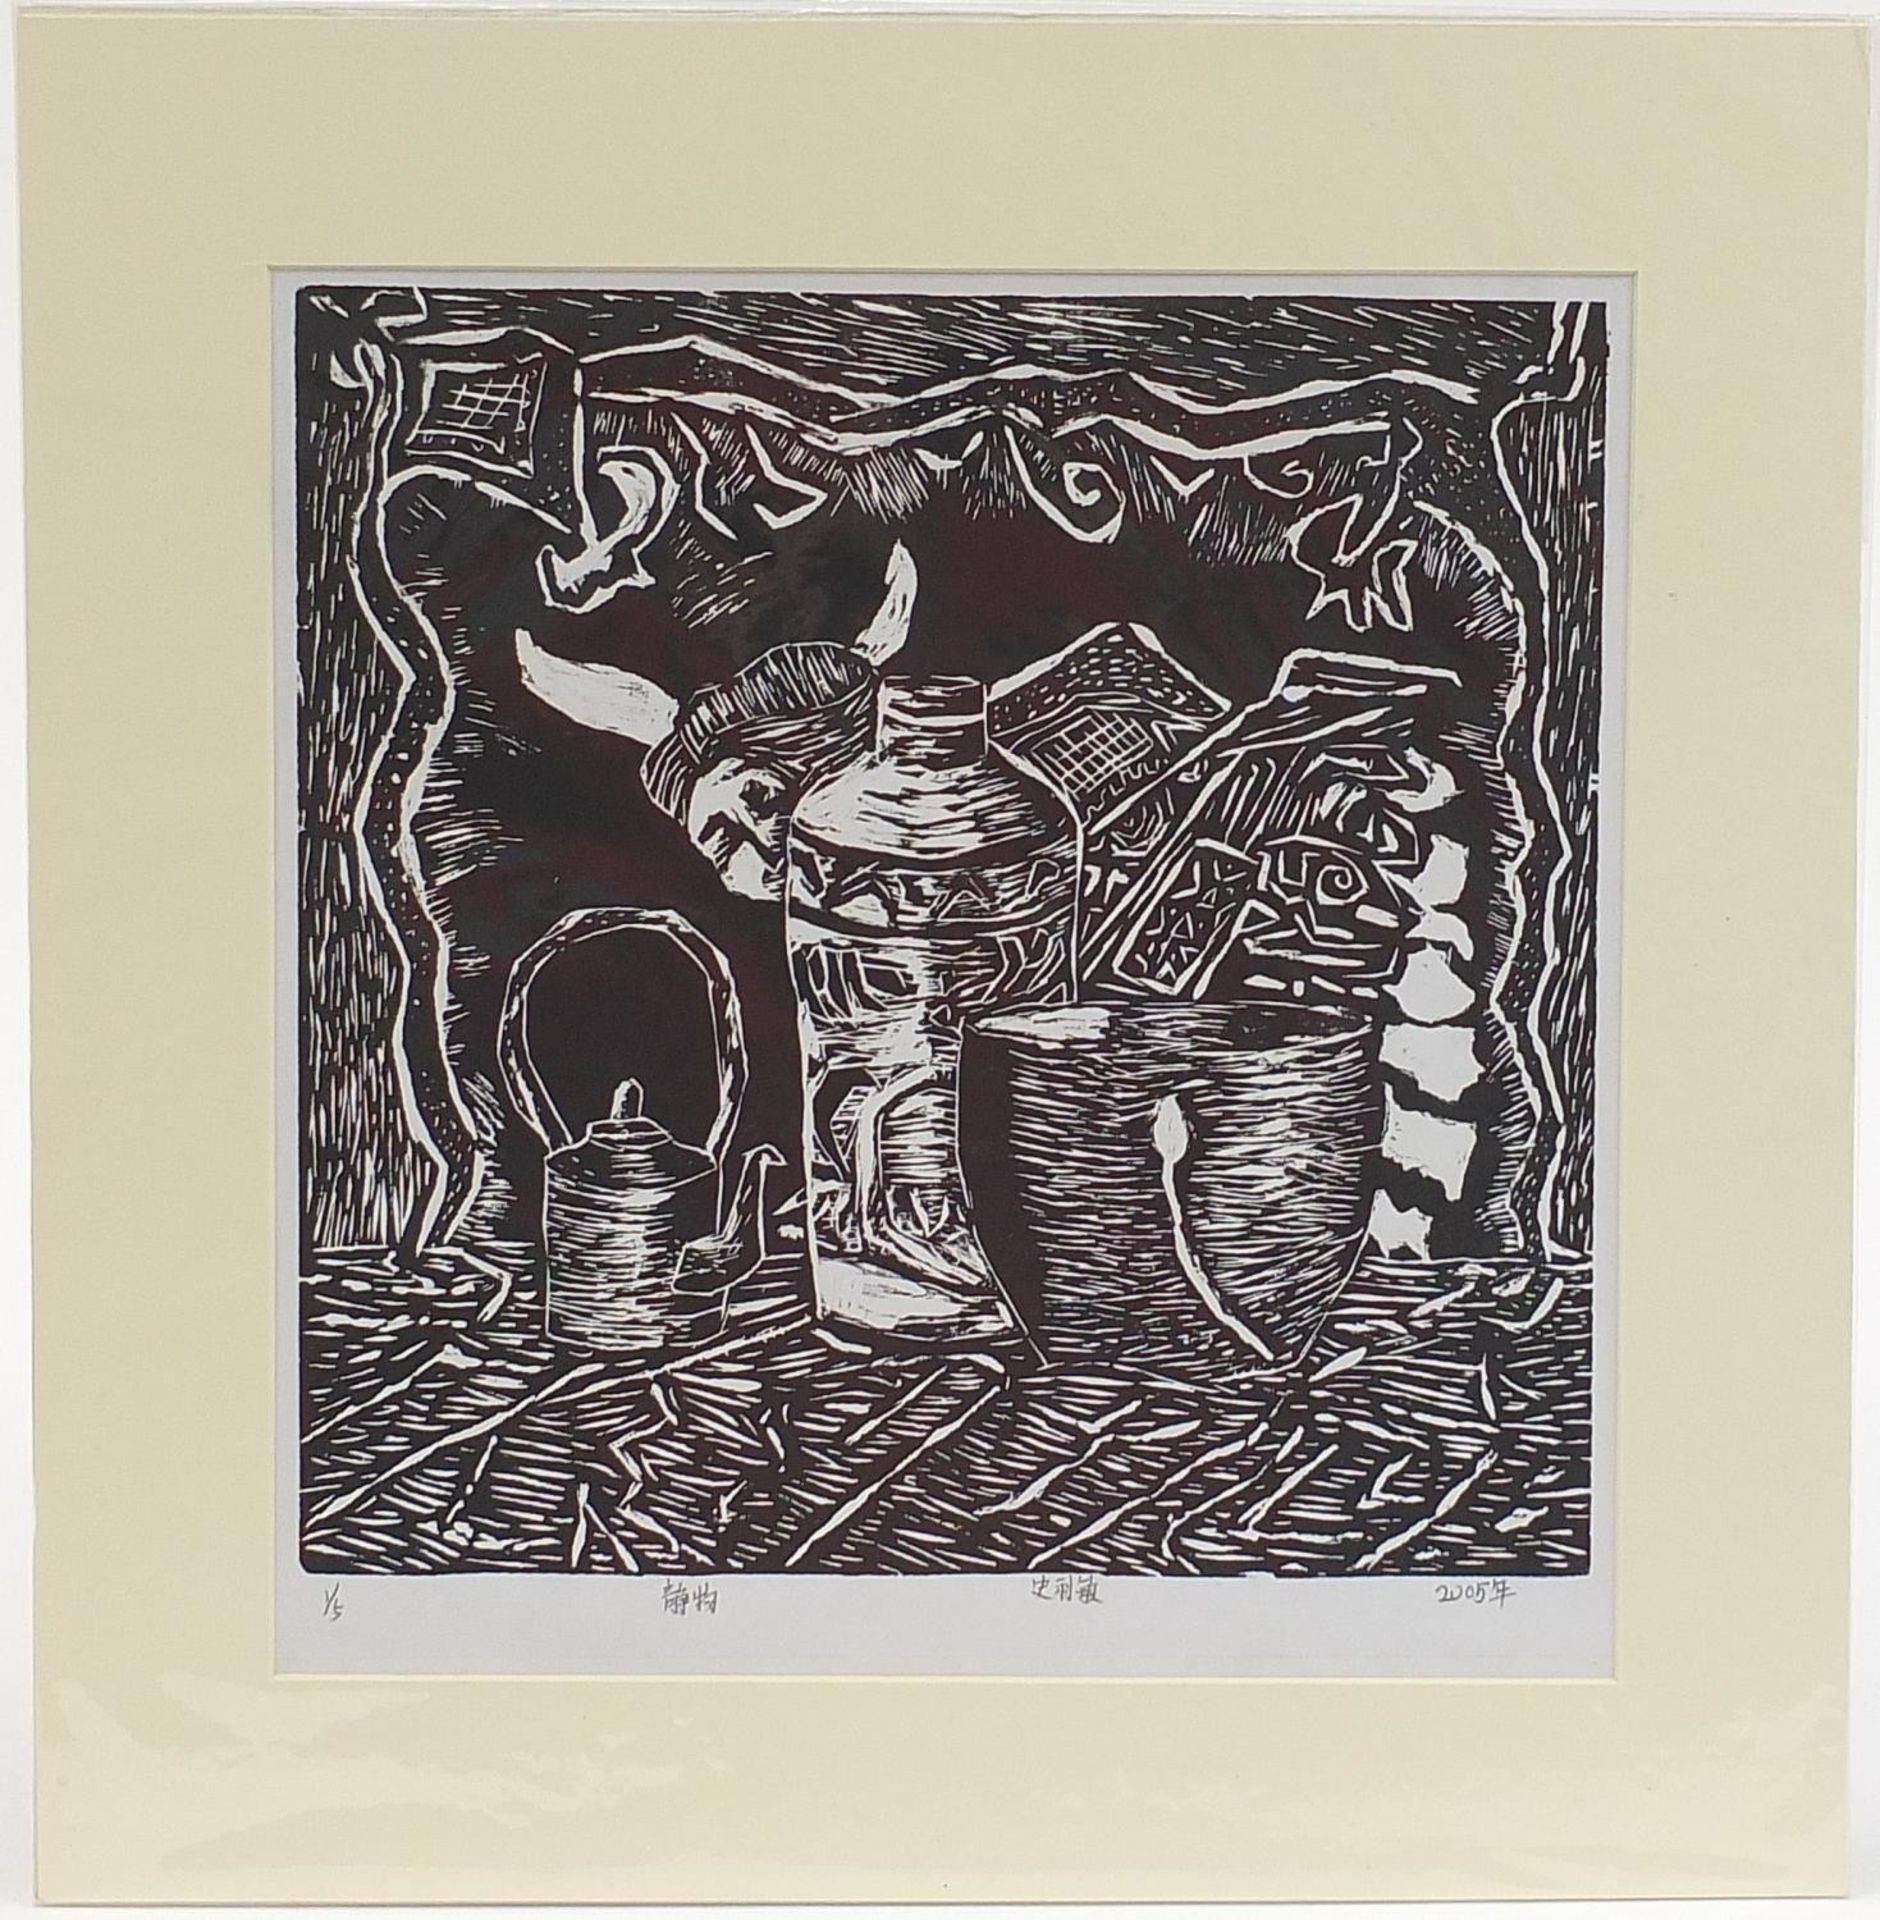 Still life vessels and figures with cattle, three Chinese pencil signed prints, one by Shi Li Min, - Image 12 of 15